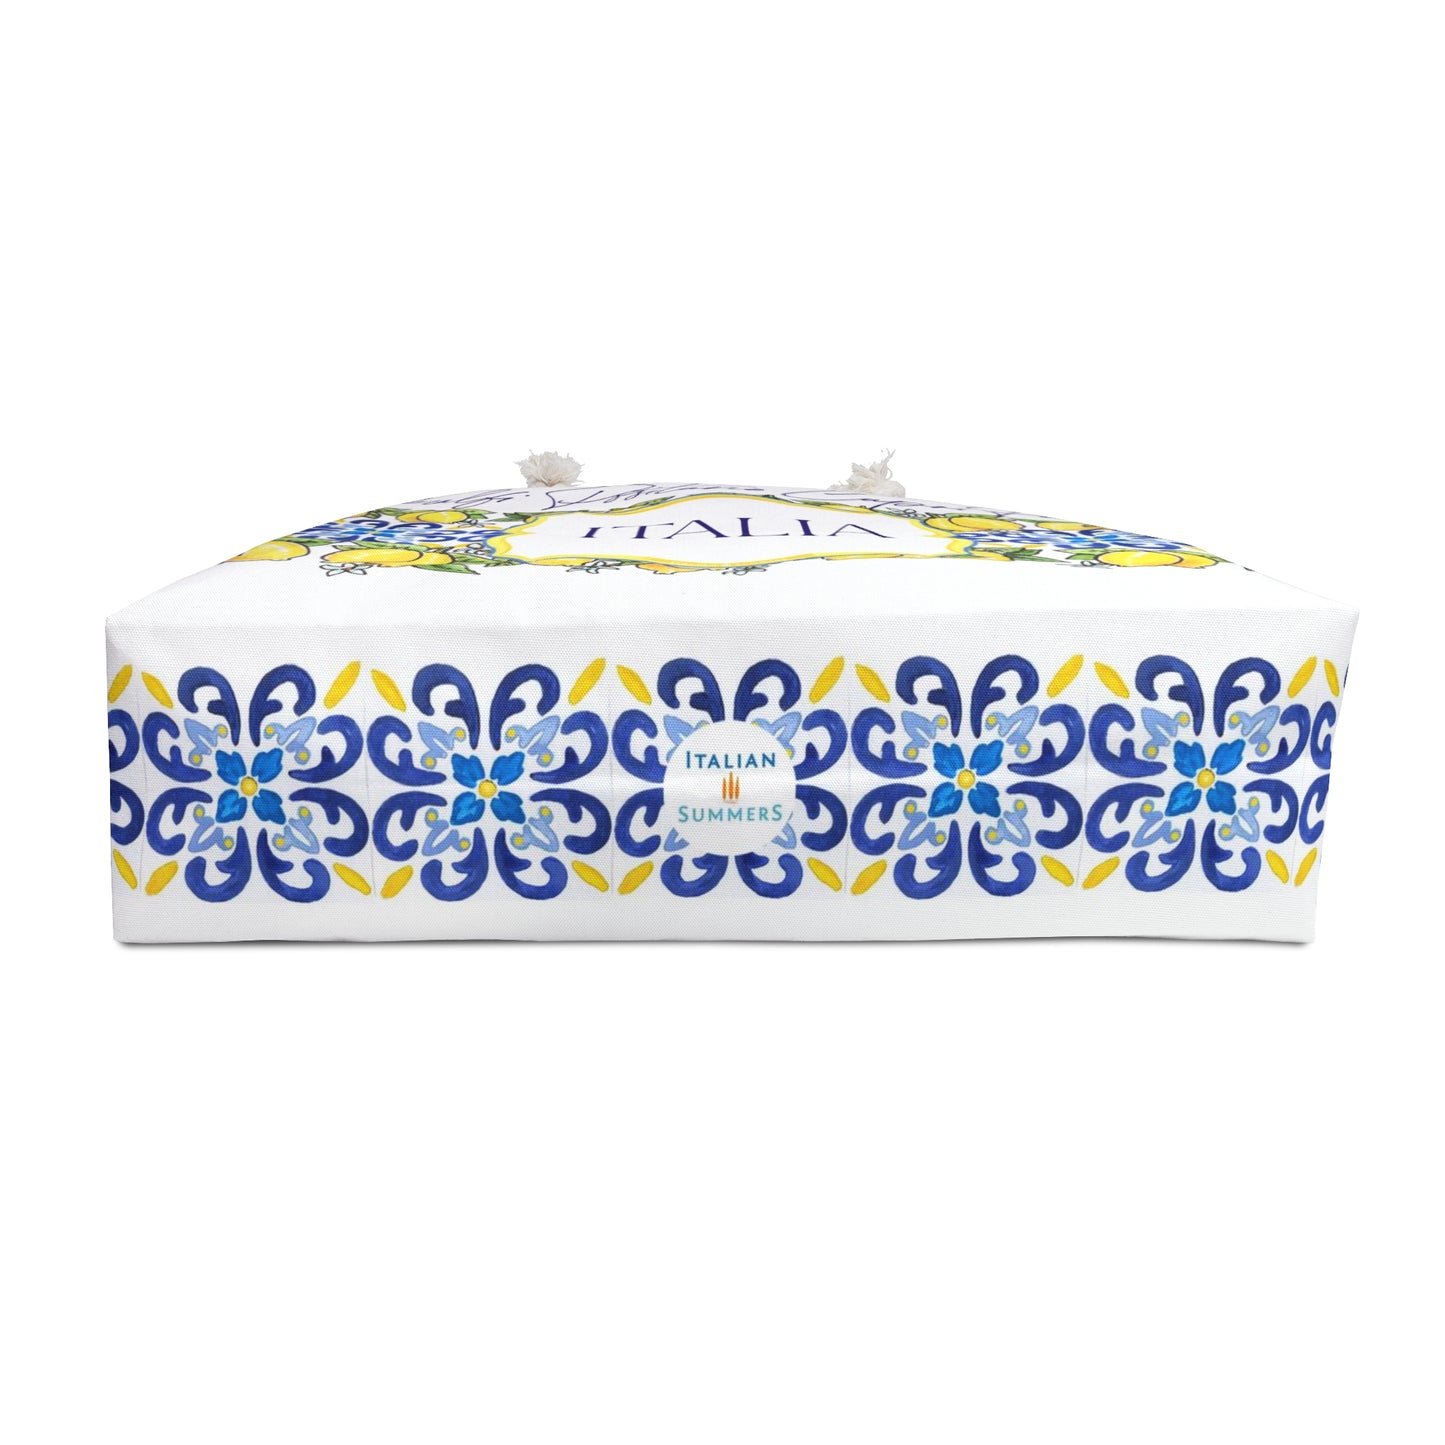 Italy-inspired XL Beach Bag  with printed blue Italia tiles in a  large band across the entire bag , framed with garlands of sunny, leafy Sorrento Lemons  with flowers. A large cartouche -like crest in the middle has the word  ITALIA - made by Italian Summers